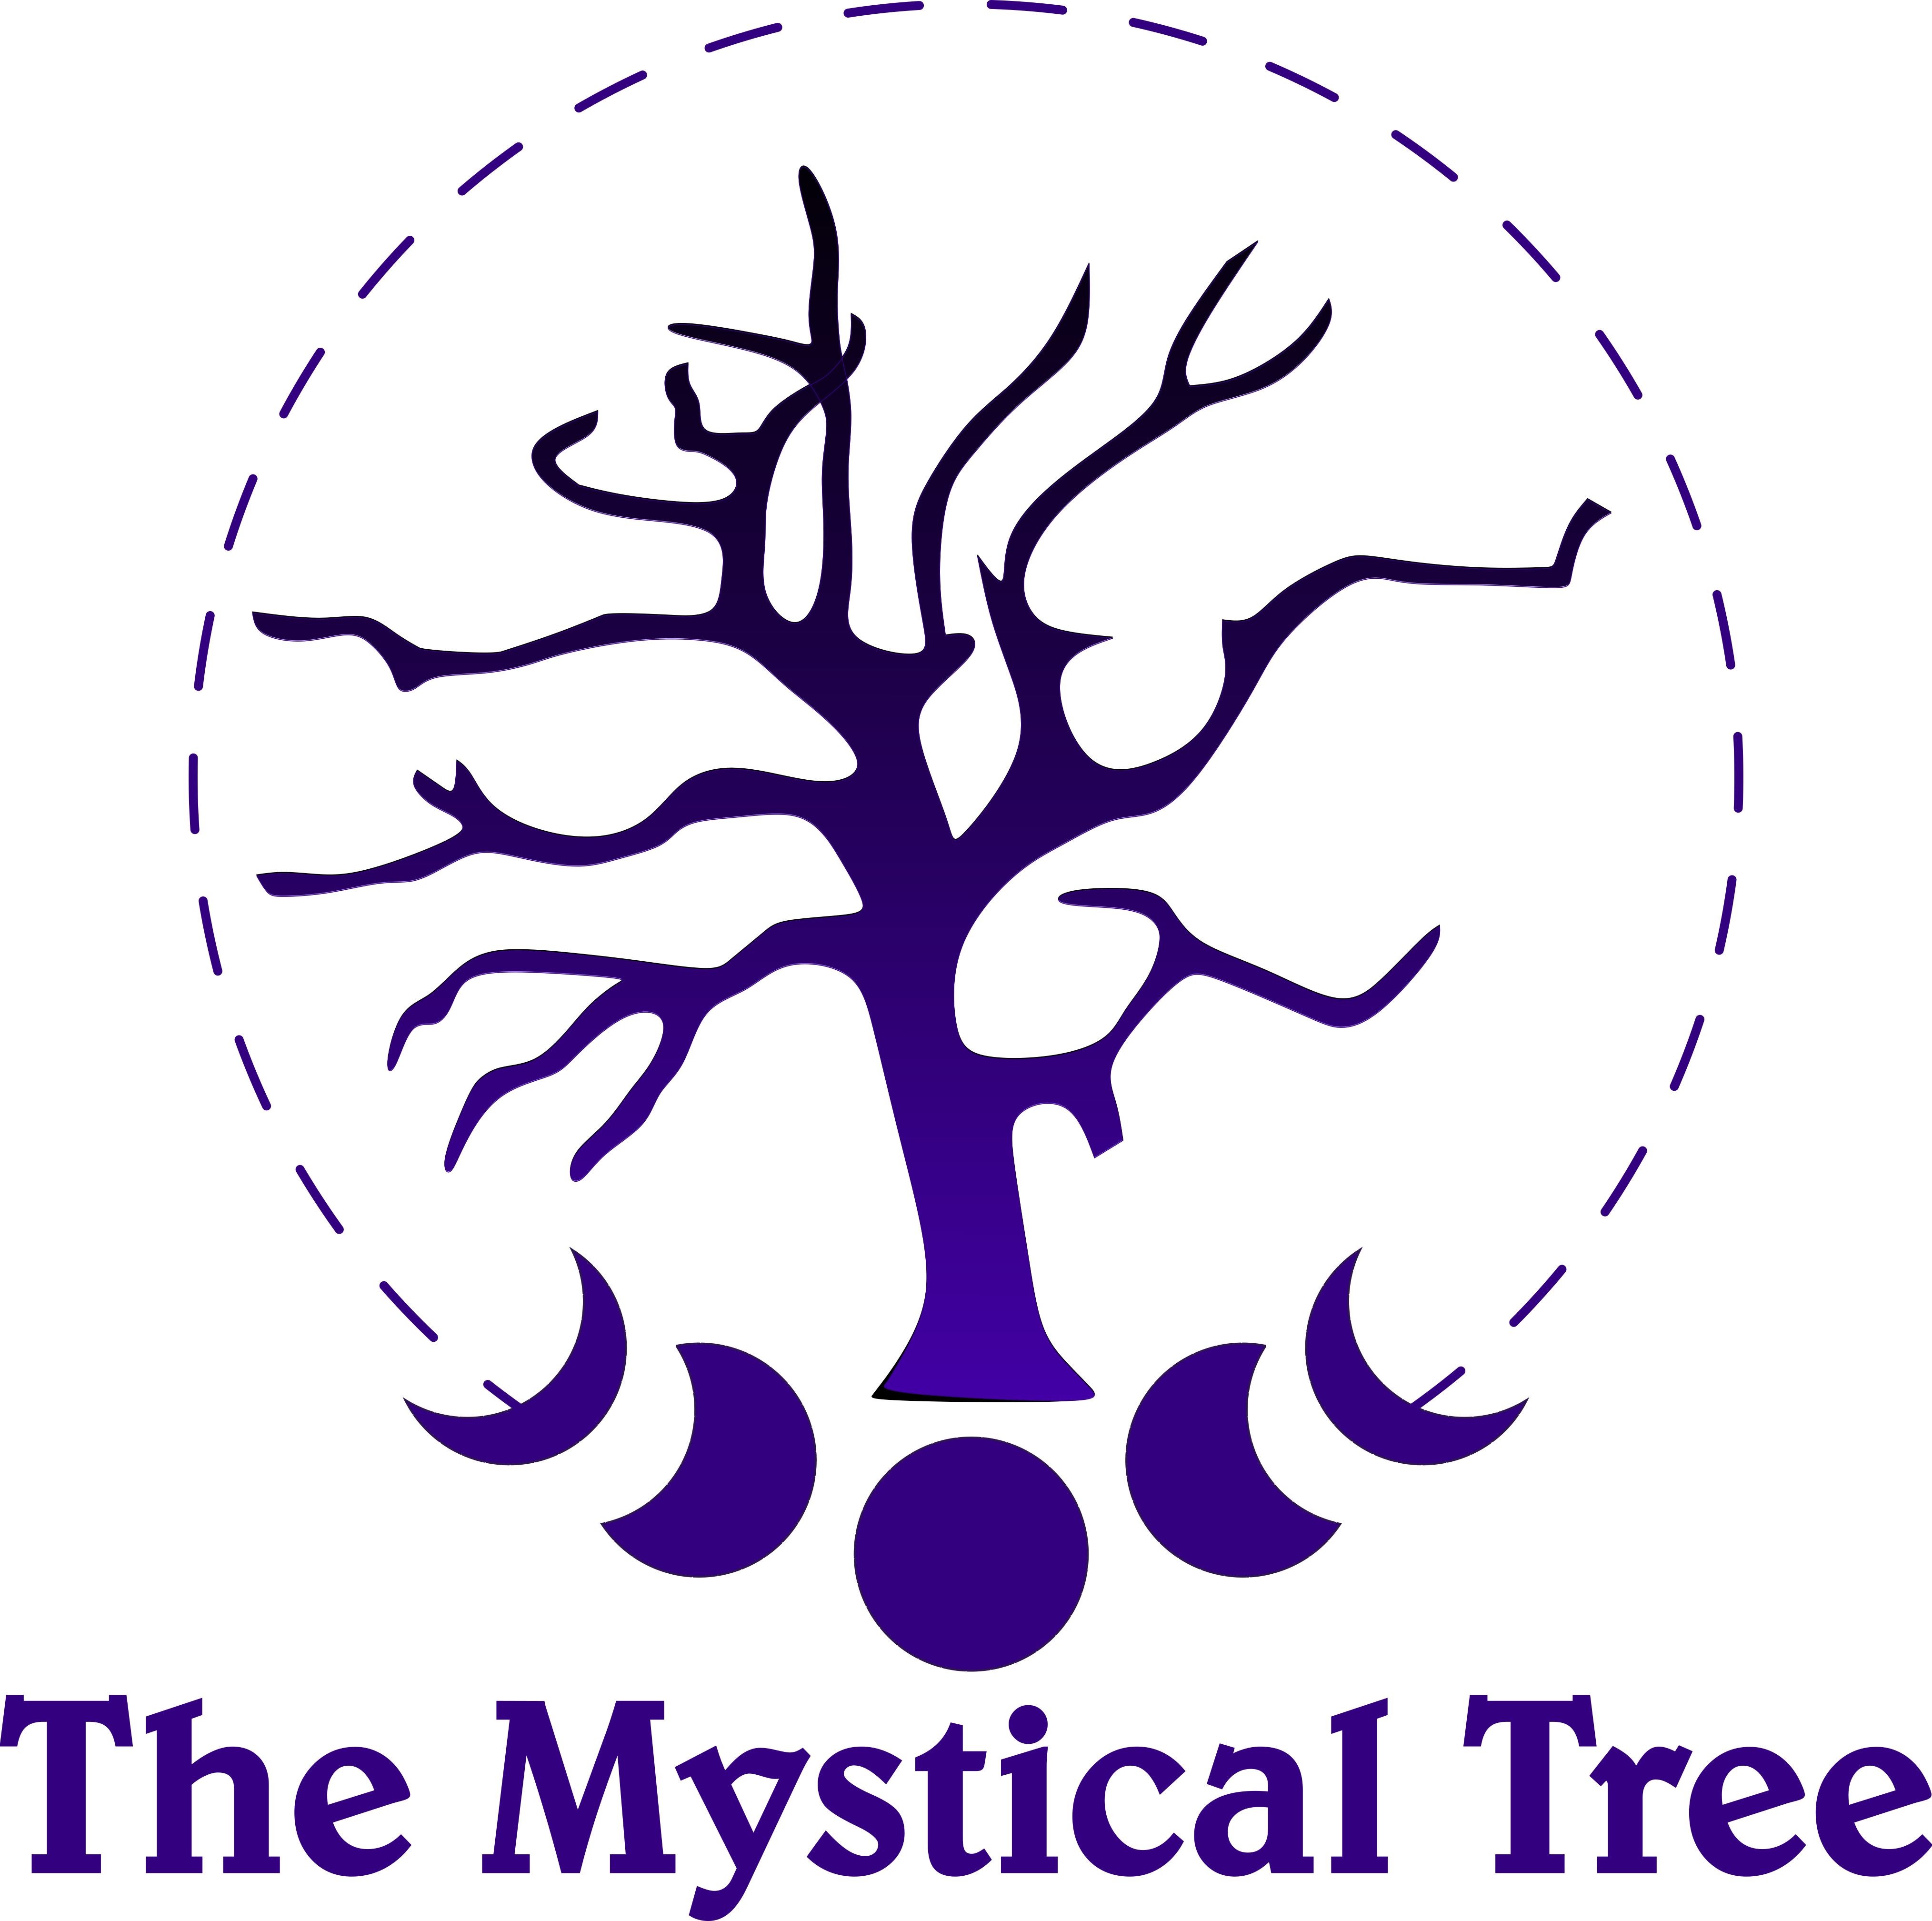 The Mystical Tree